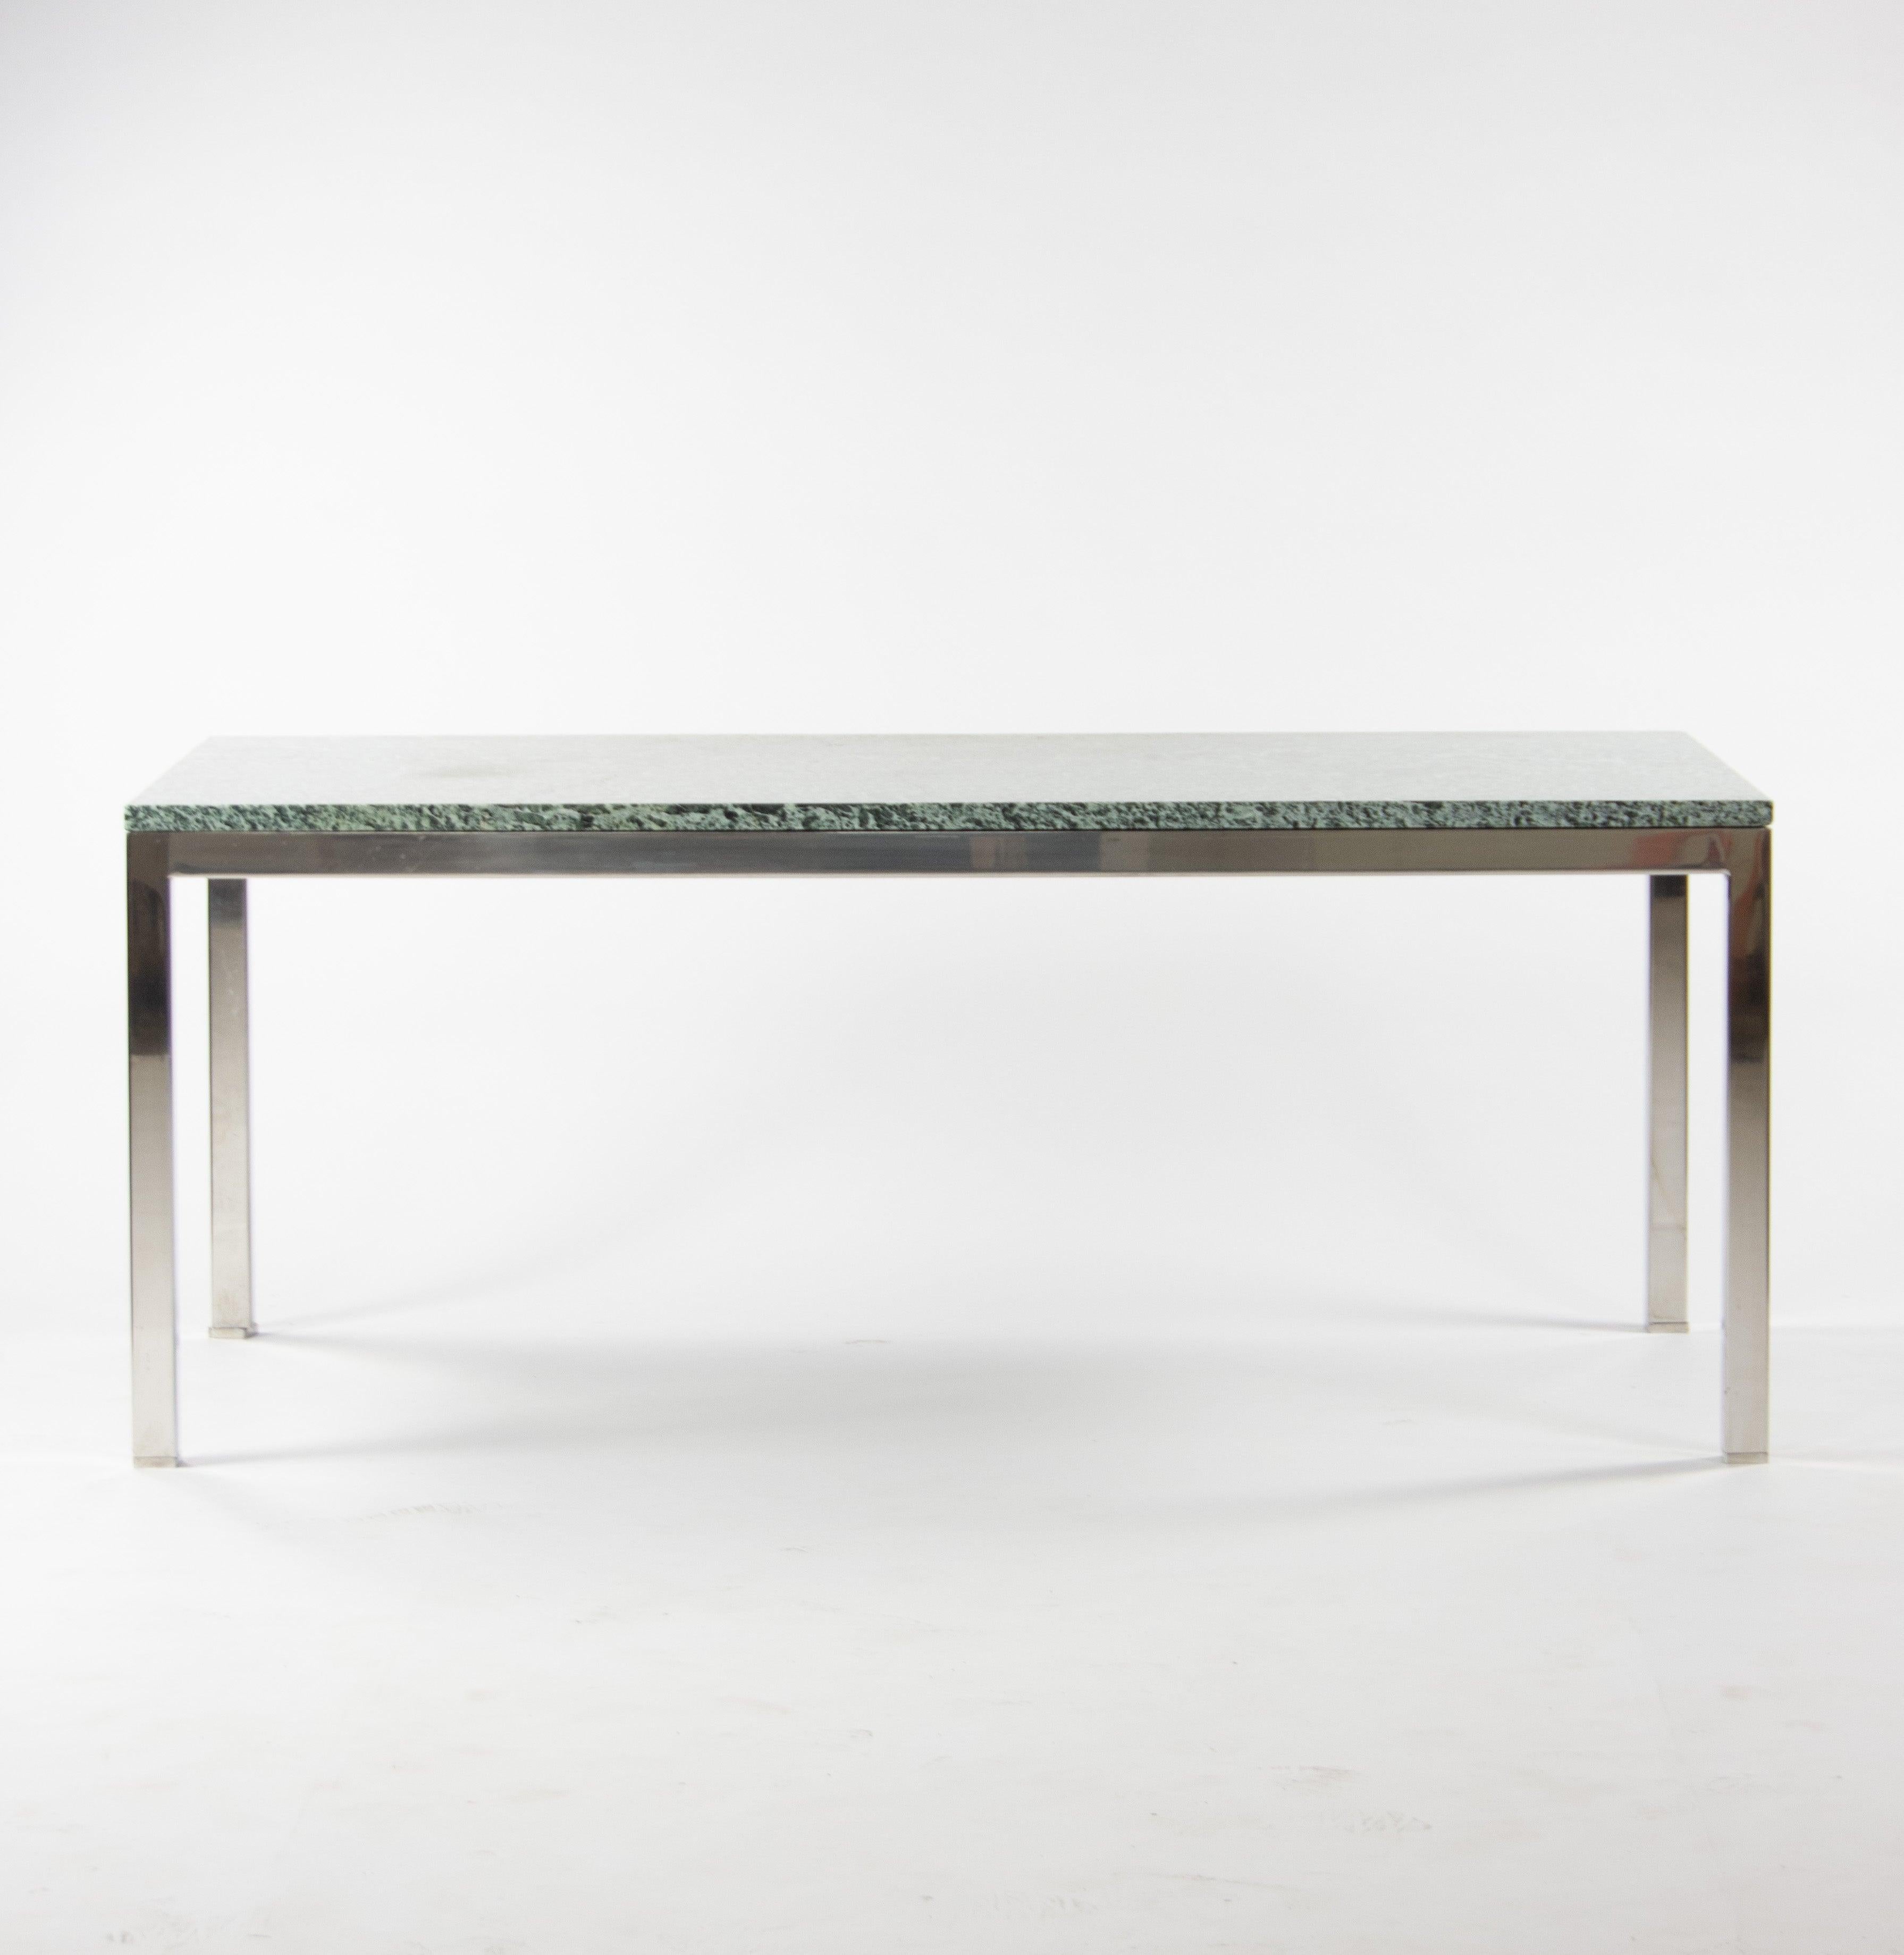 Green Granite Cumberland Meeting Dining Conference Tables Steel Base For Sale 1